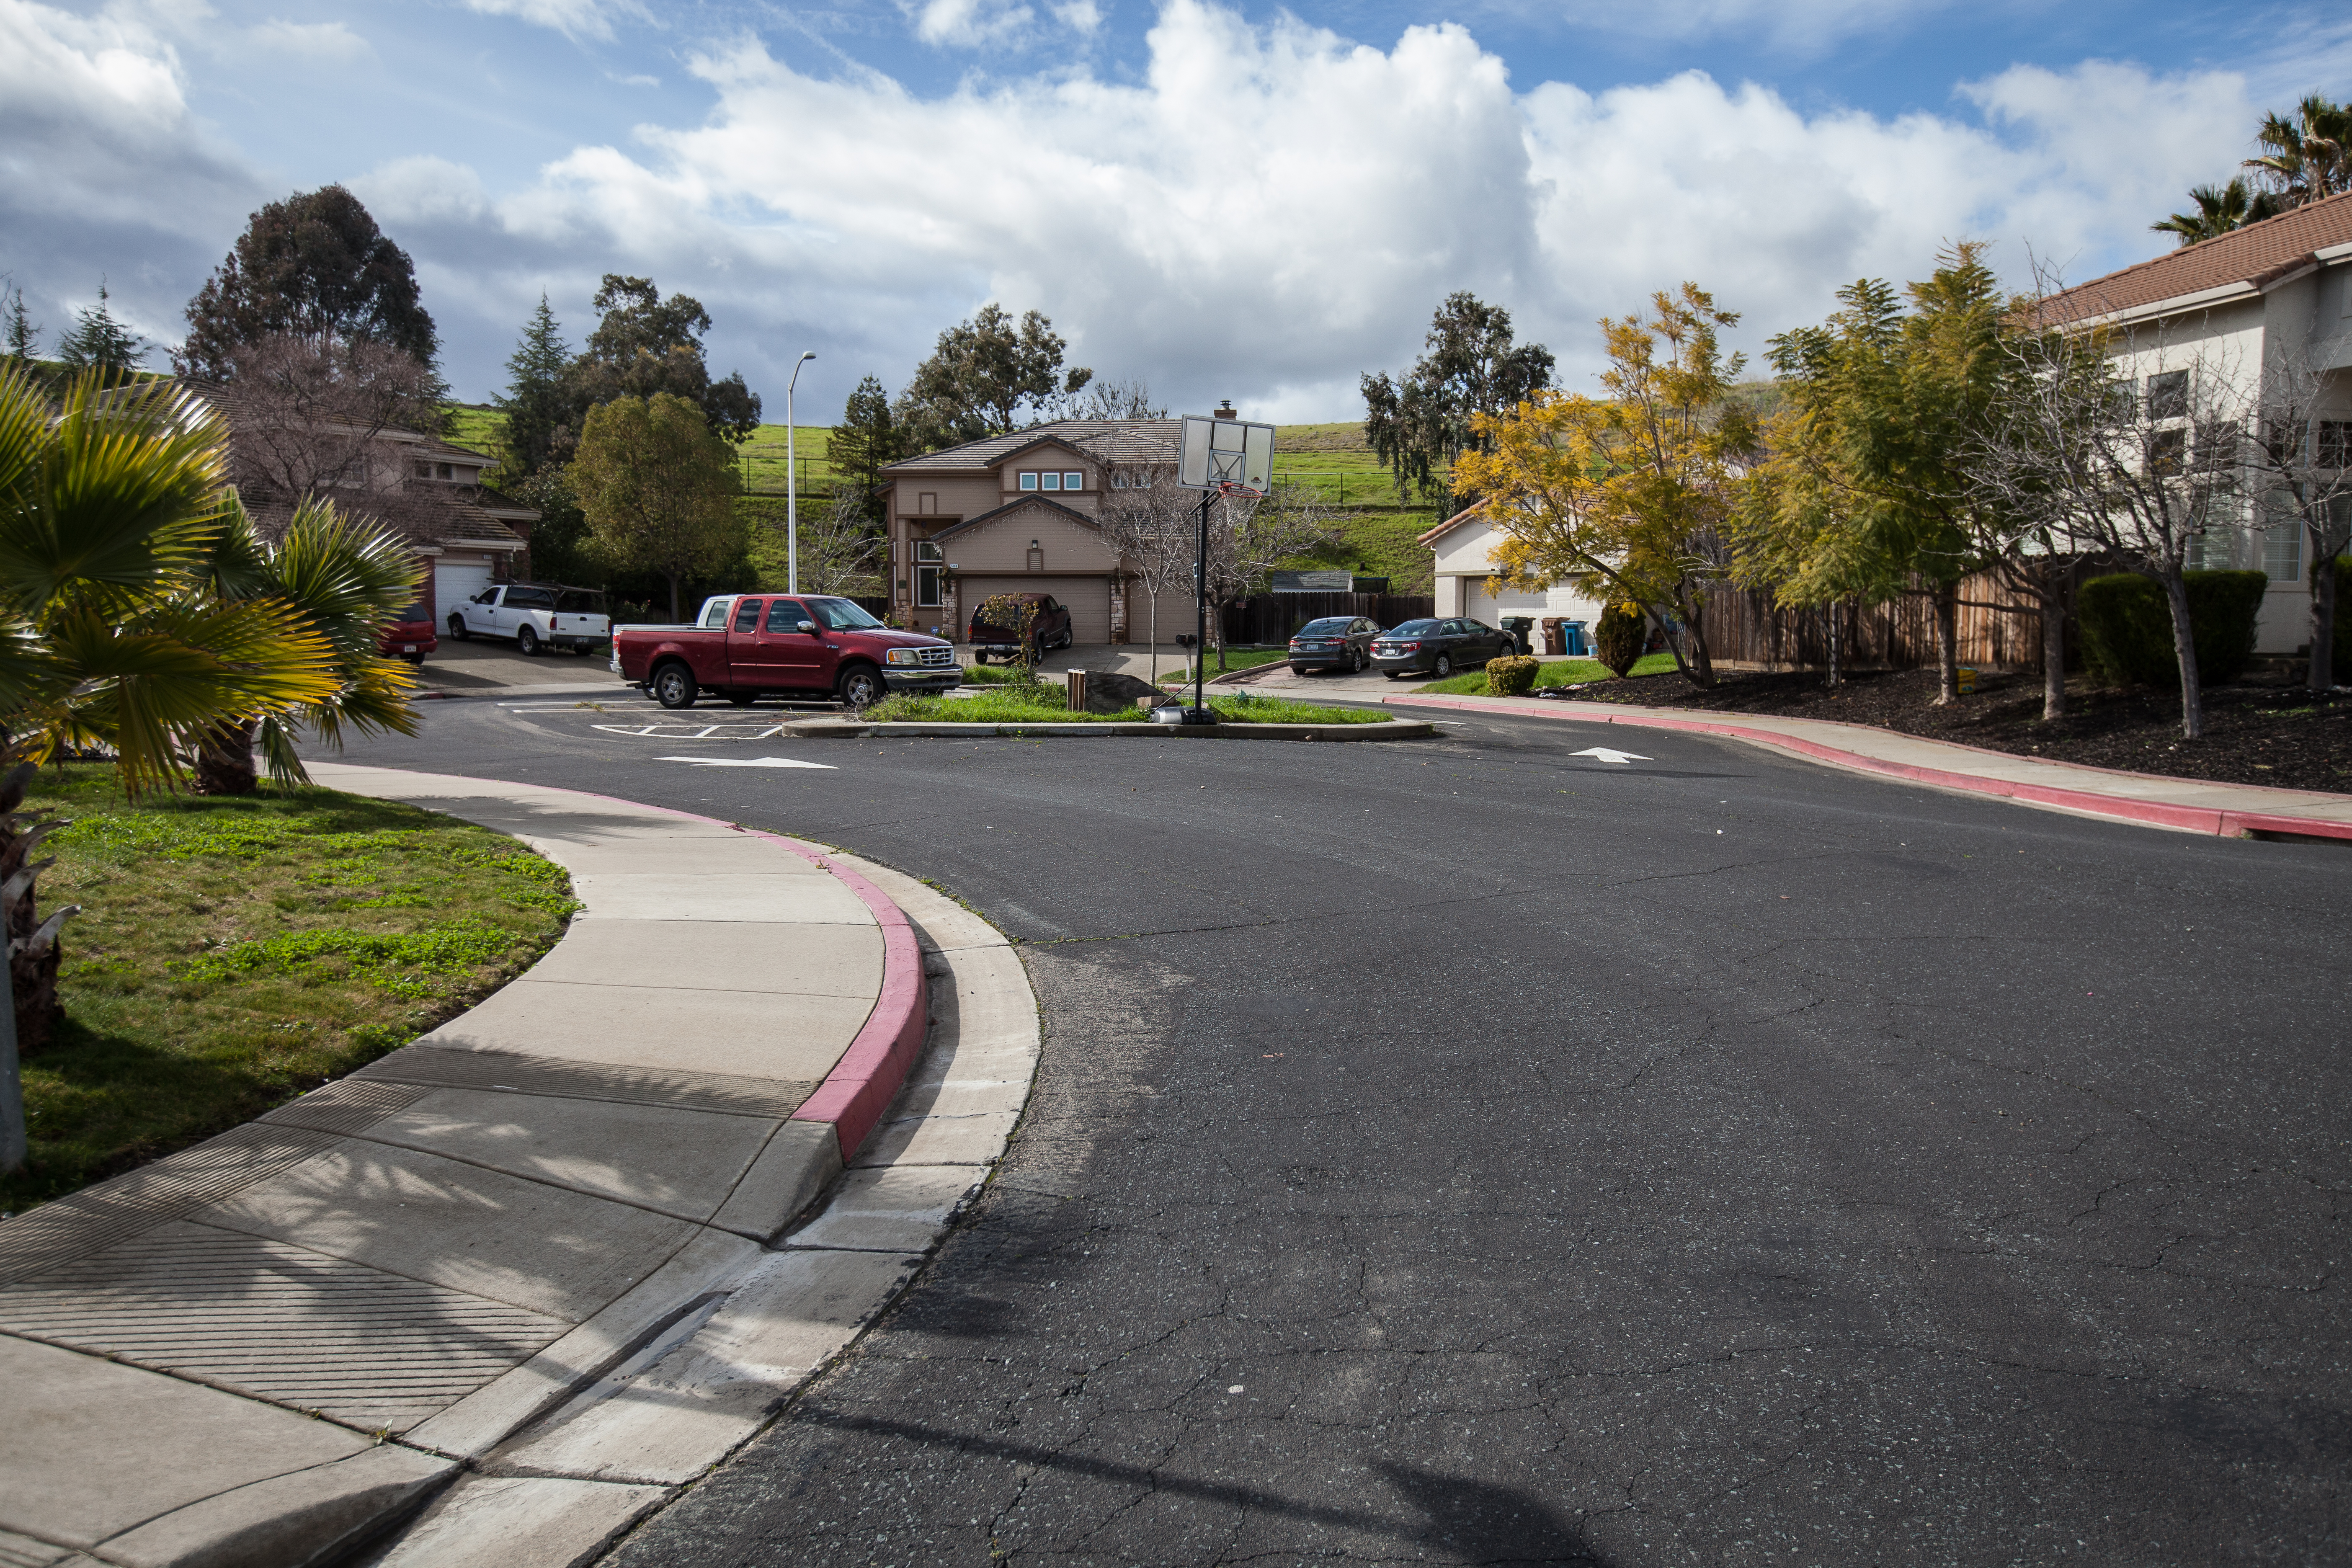 American Suburb: The Tipping Point